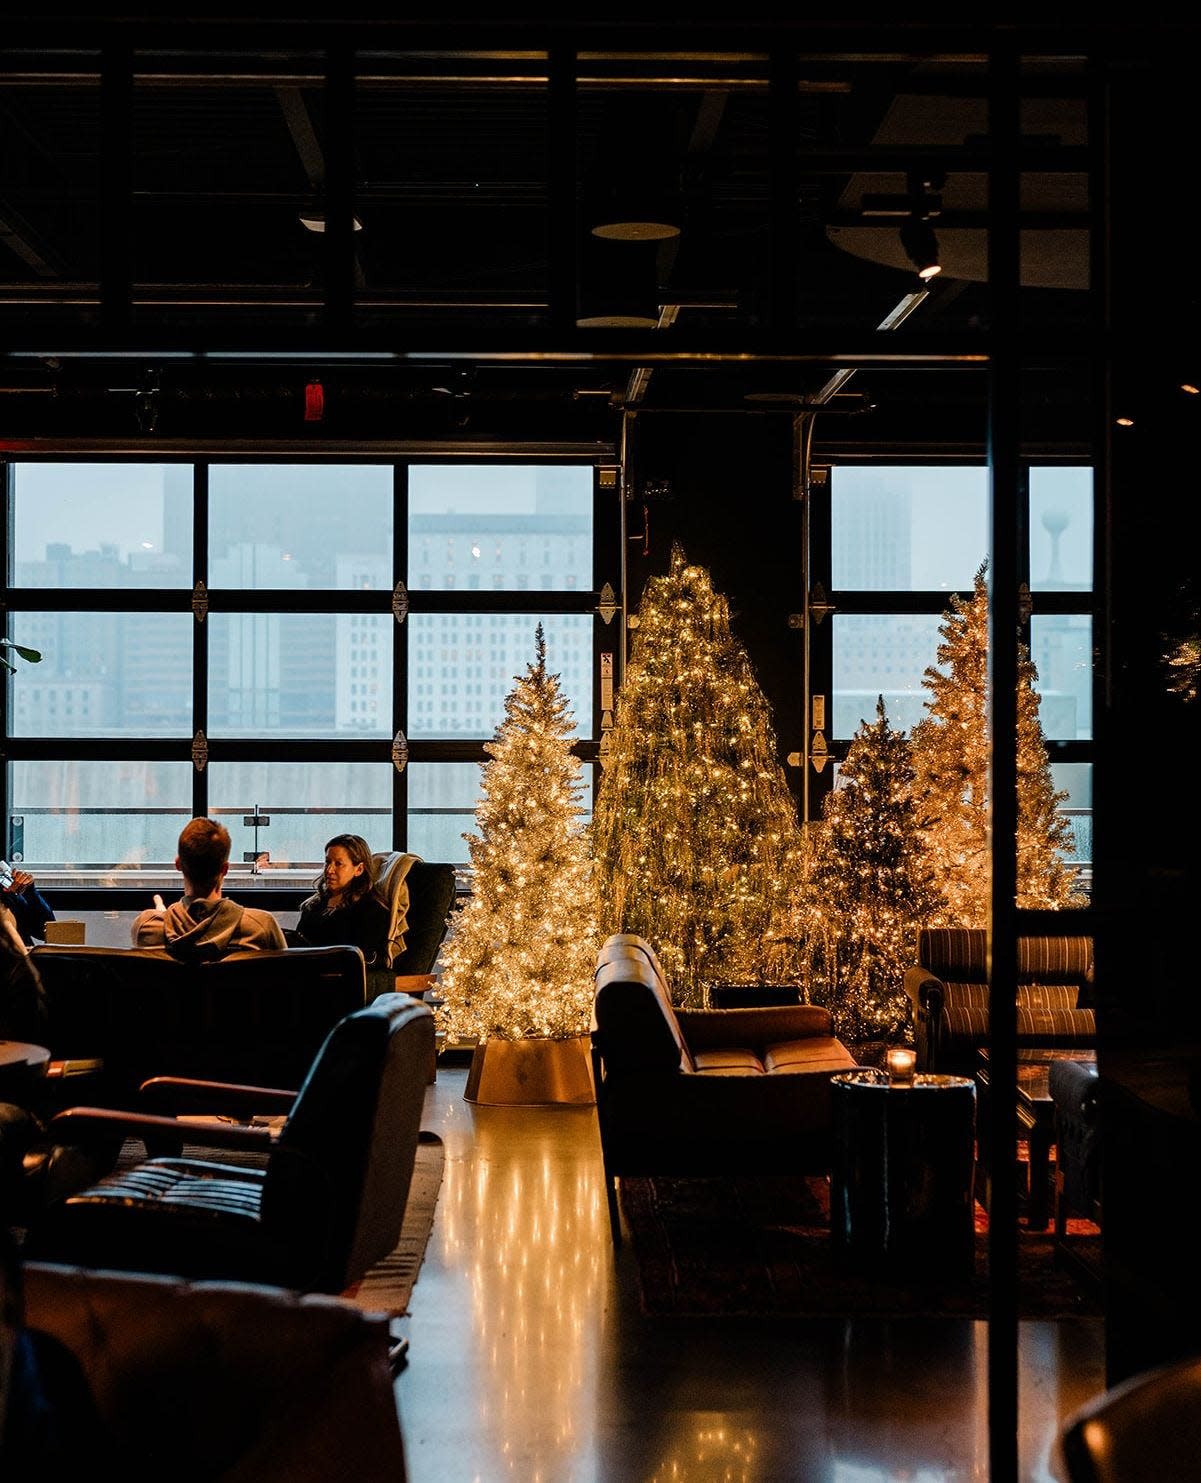 Want to eat out on Christmas? Here are Columbus restaurants that are